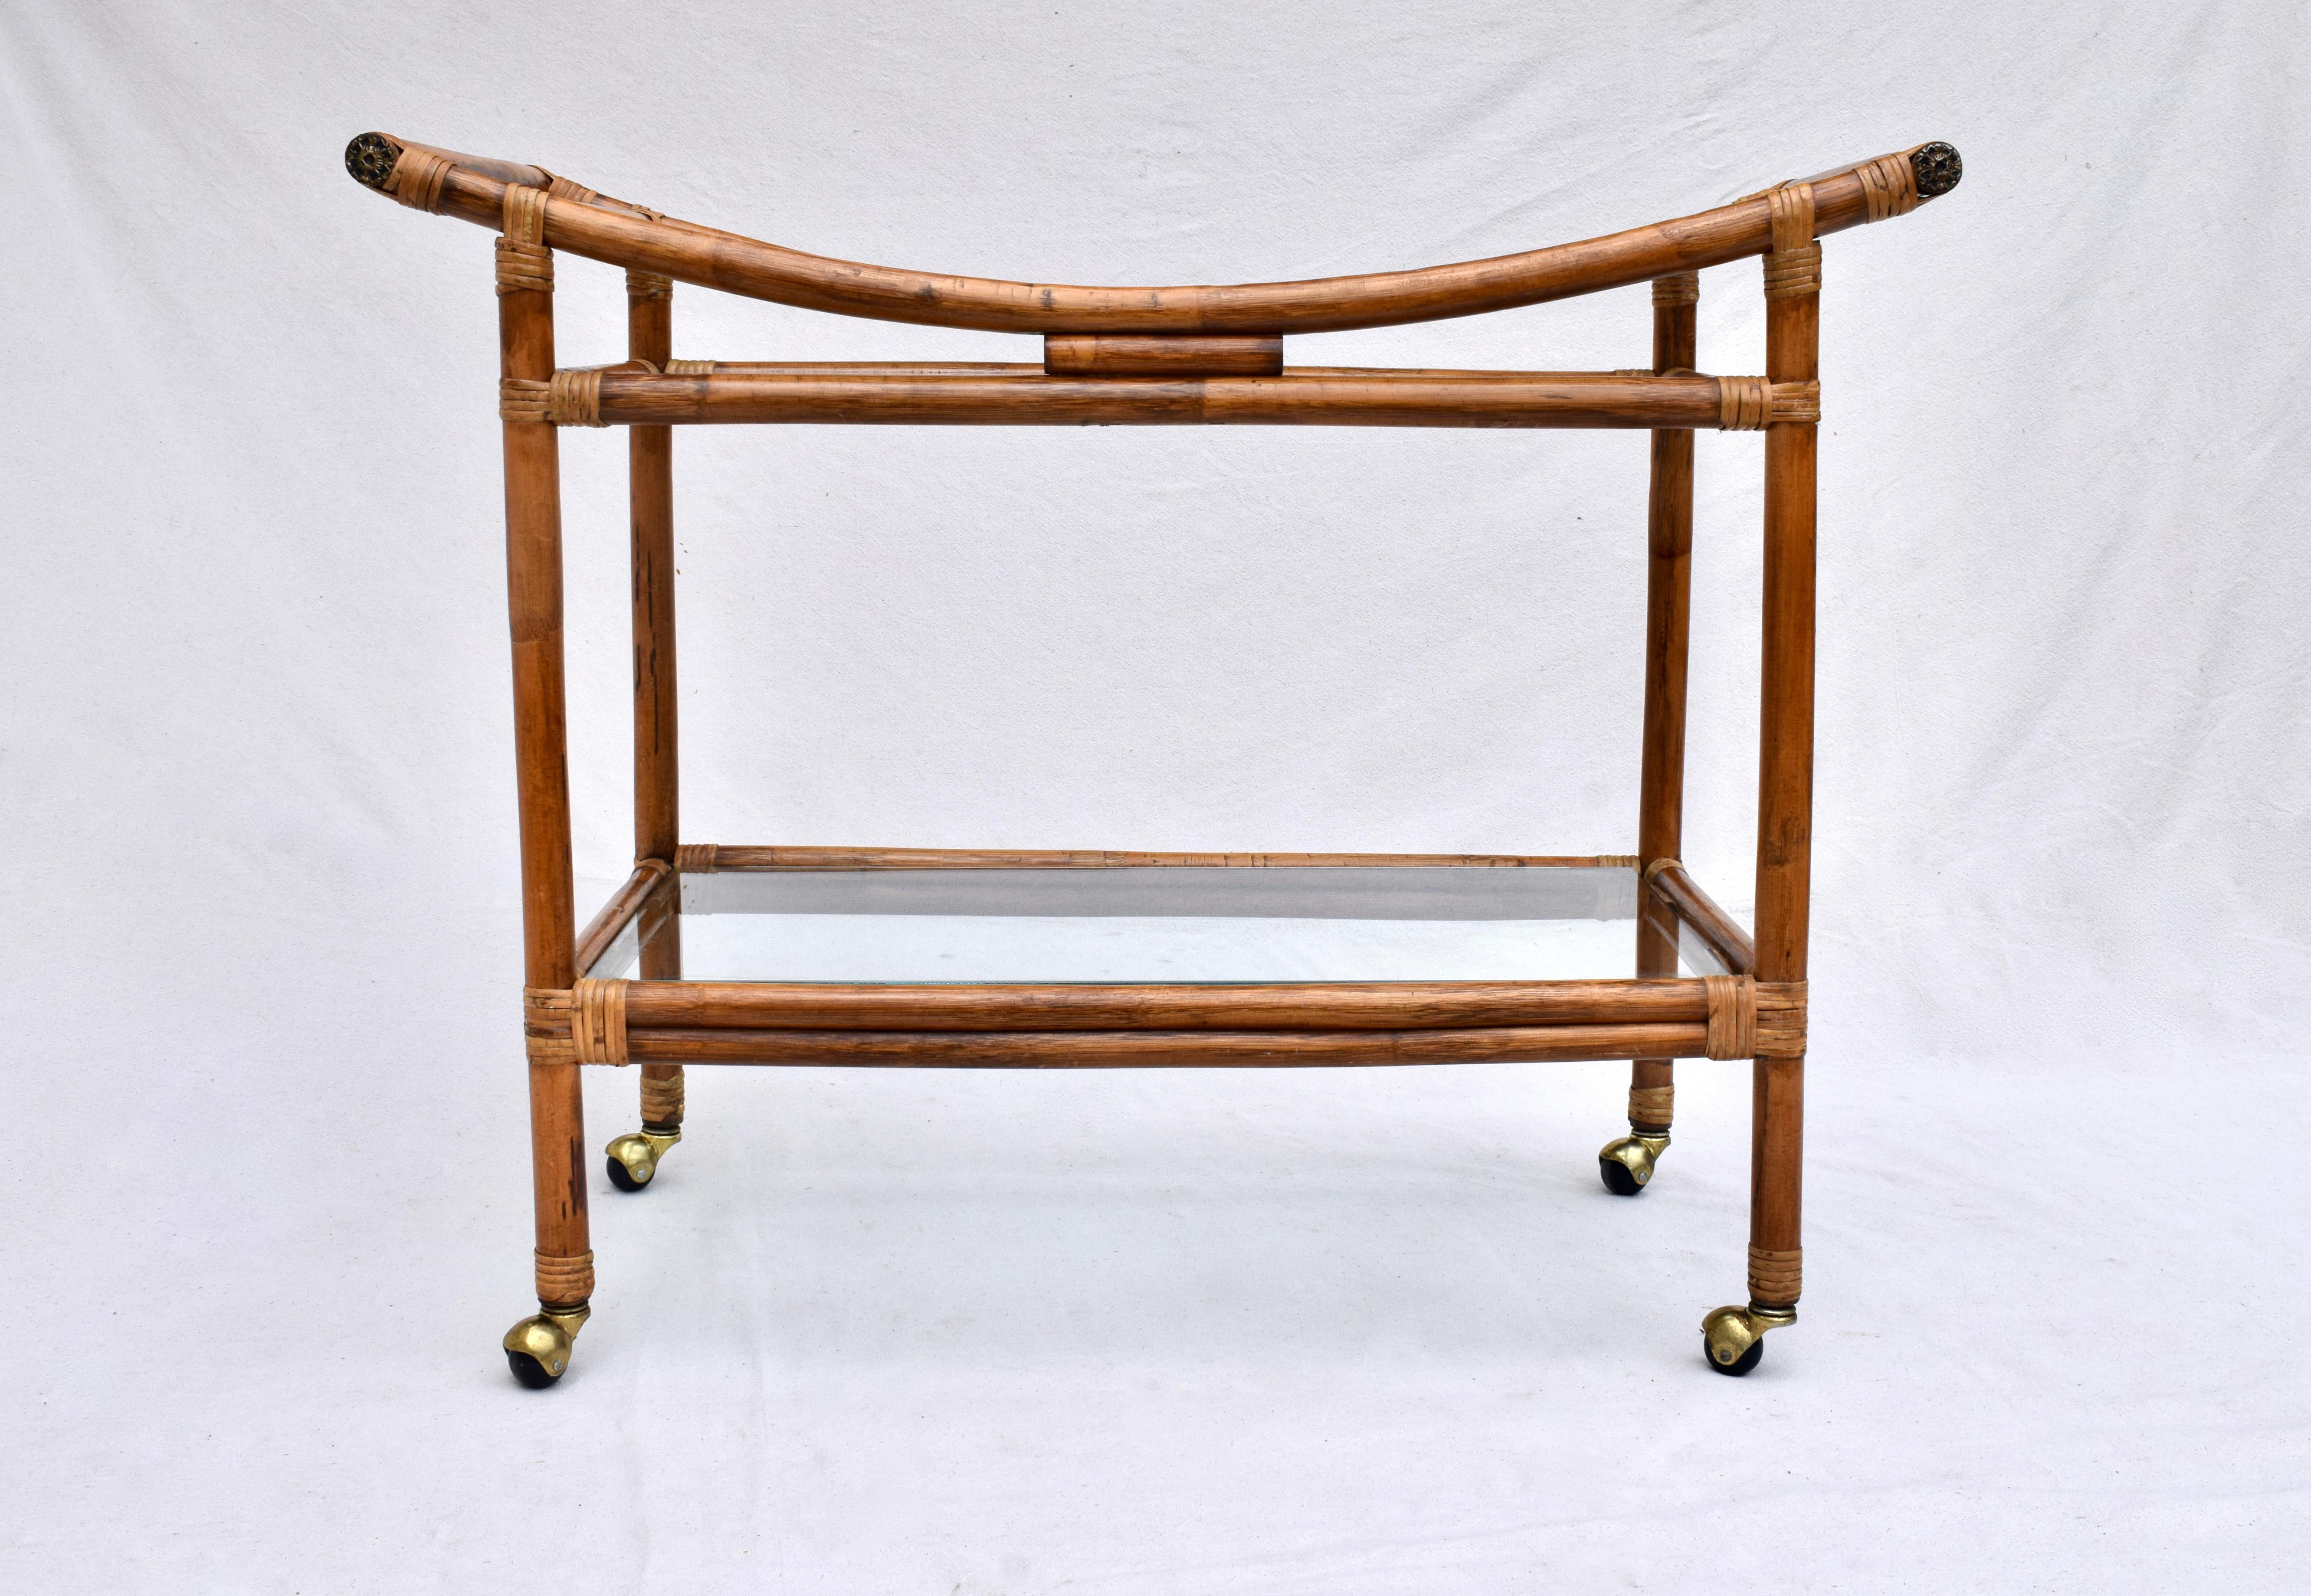 Two tier bent bamboo & glass Pagoda influenced bar cart or serving cart on casters attributed to Calif-Asia. Versatile understated design, generous in size.